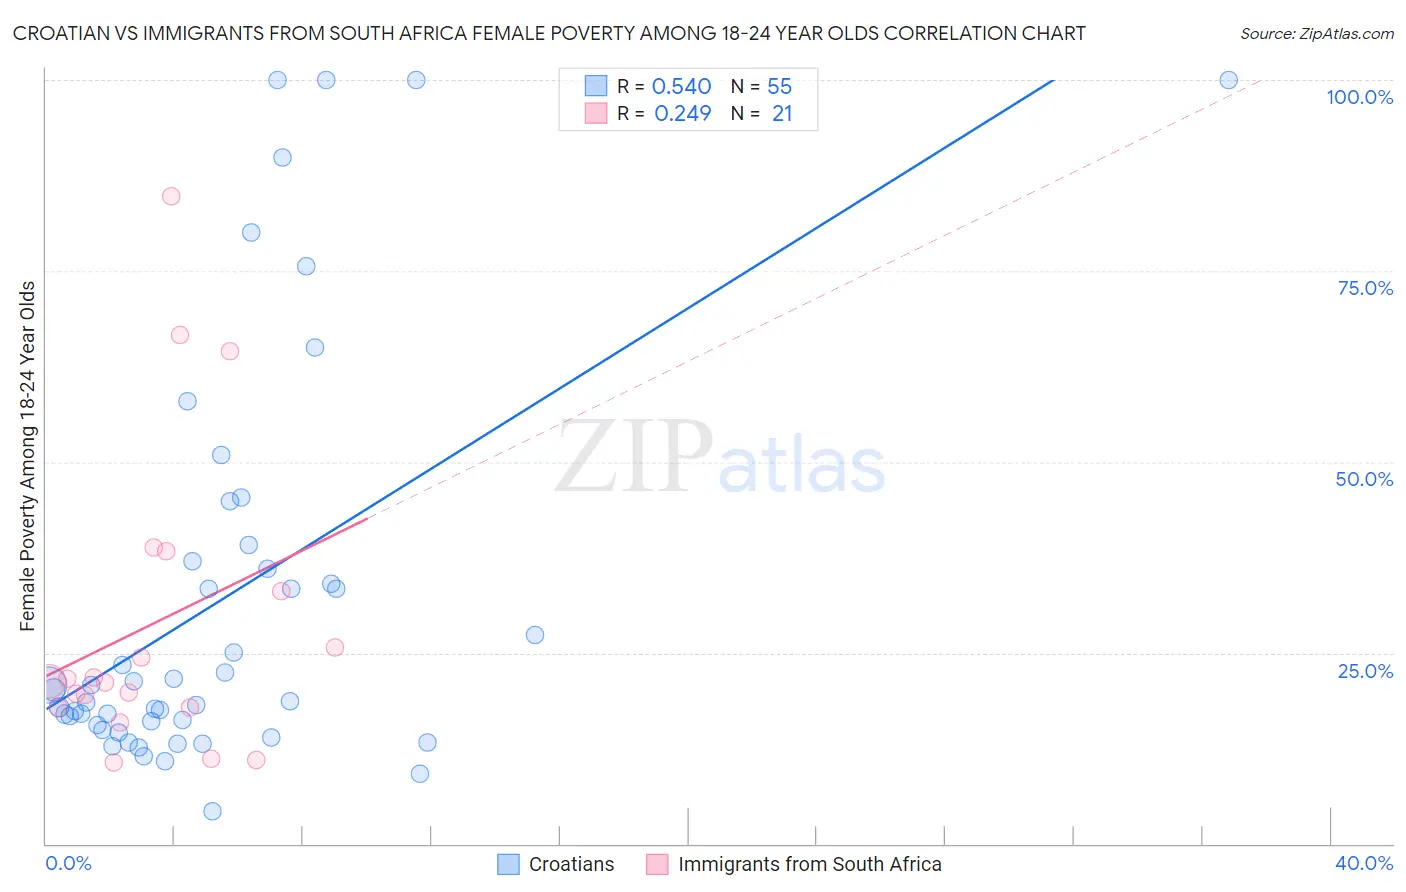 Croatian vs Immigrants from South Africa Female Poverty Among 18-24 Year Olds